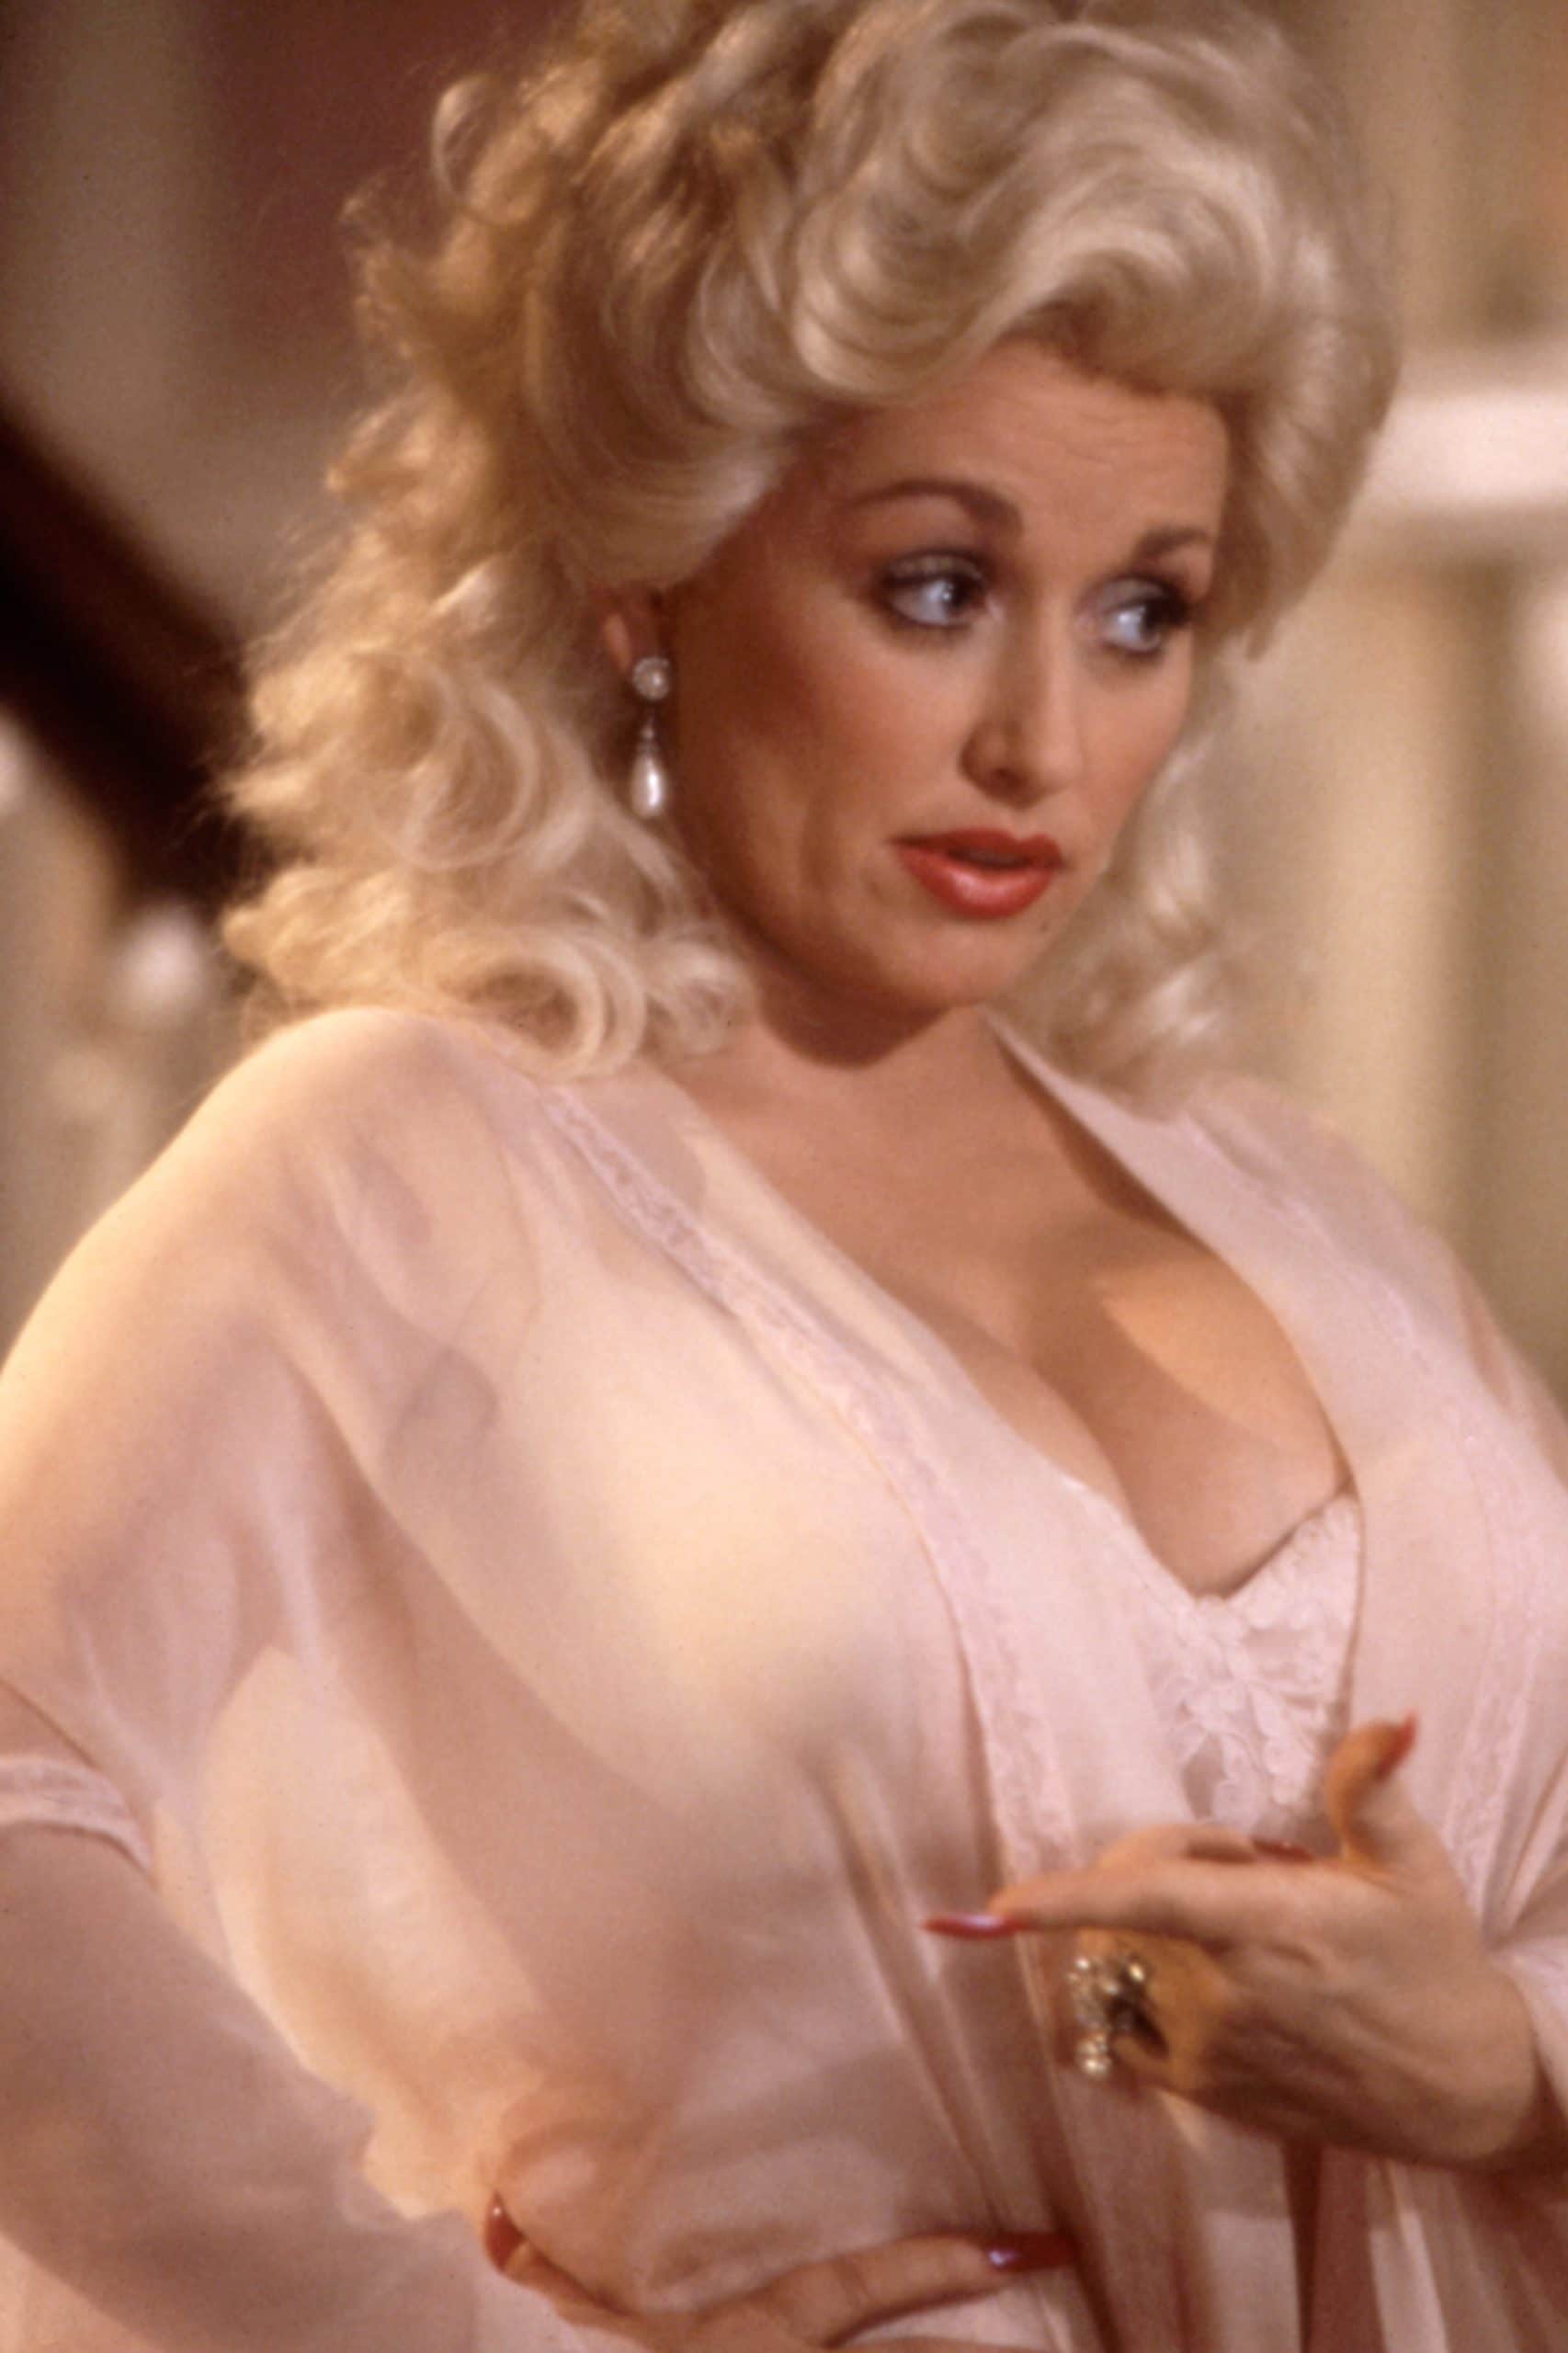 THE BEST LITTLE WHOREHOUSE IN TEXAS, Dolly Parton, 1982